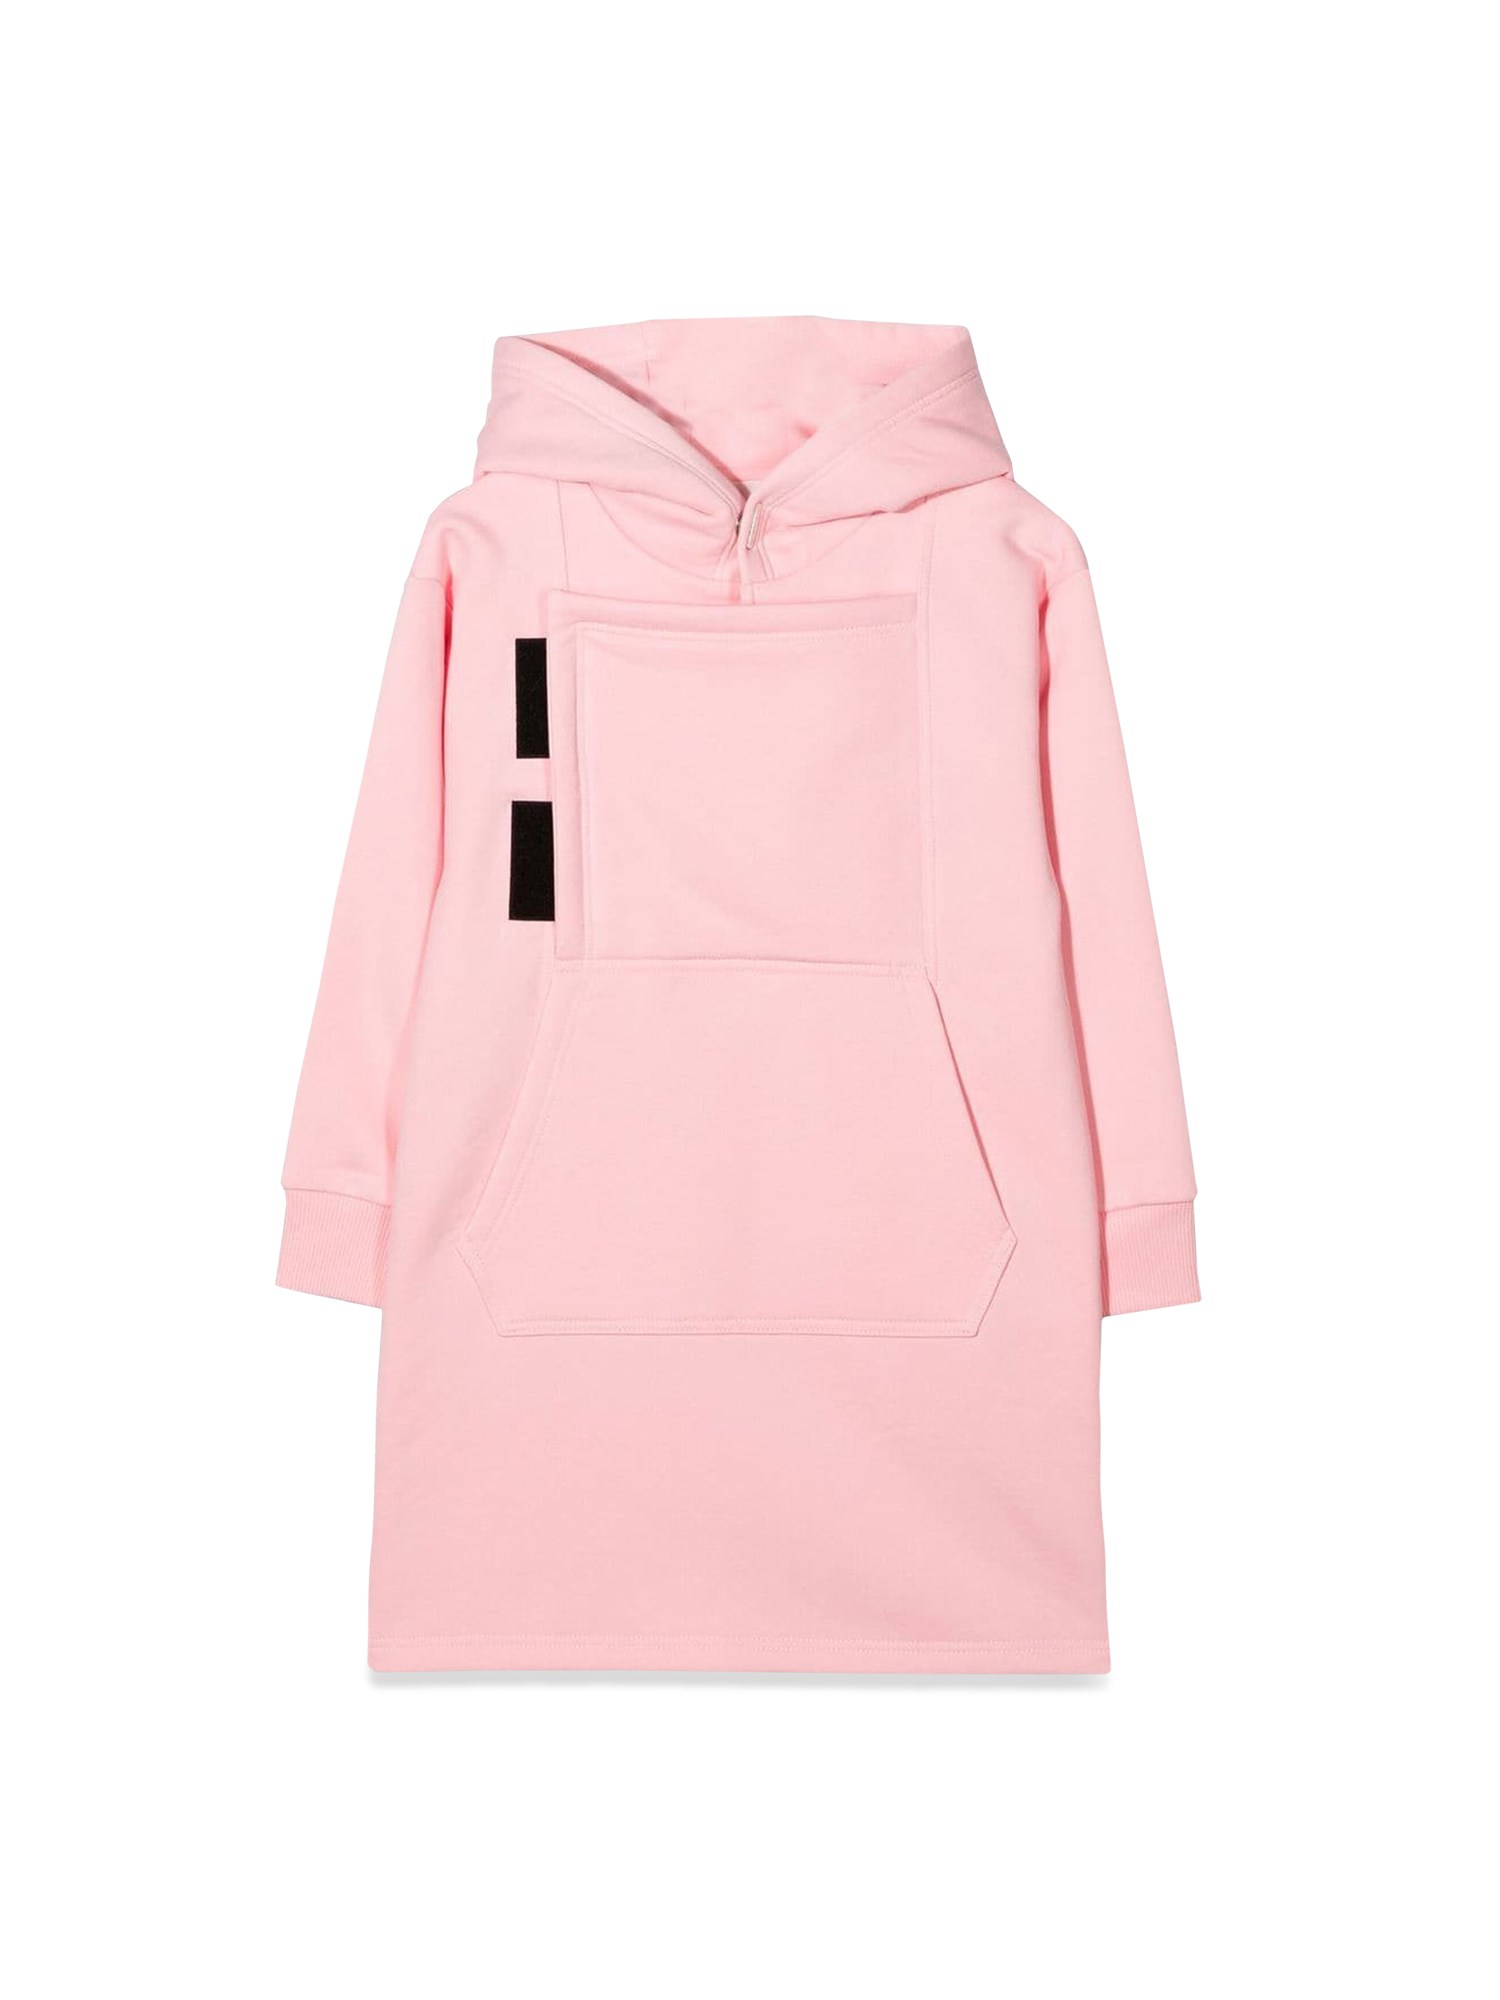 givenchy hoodie dress